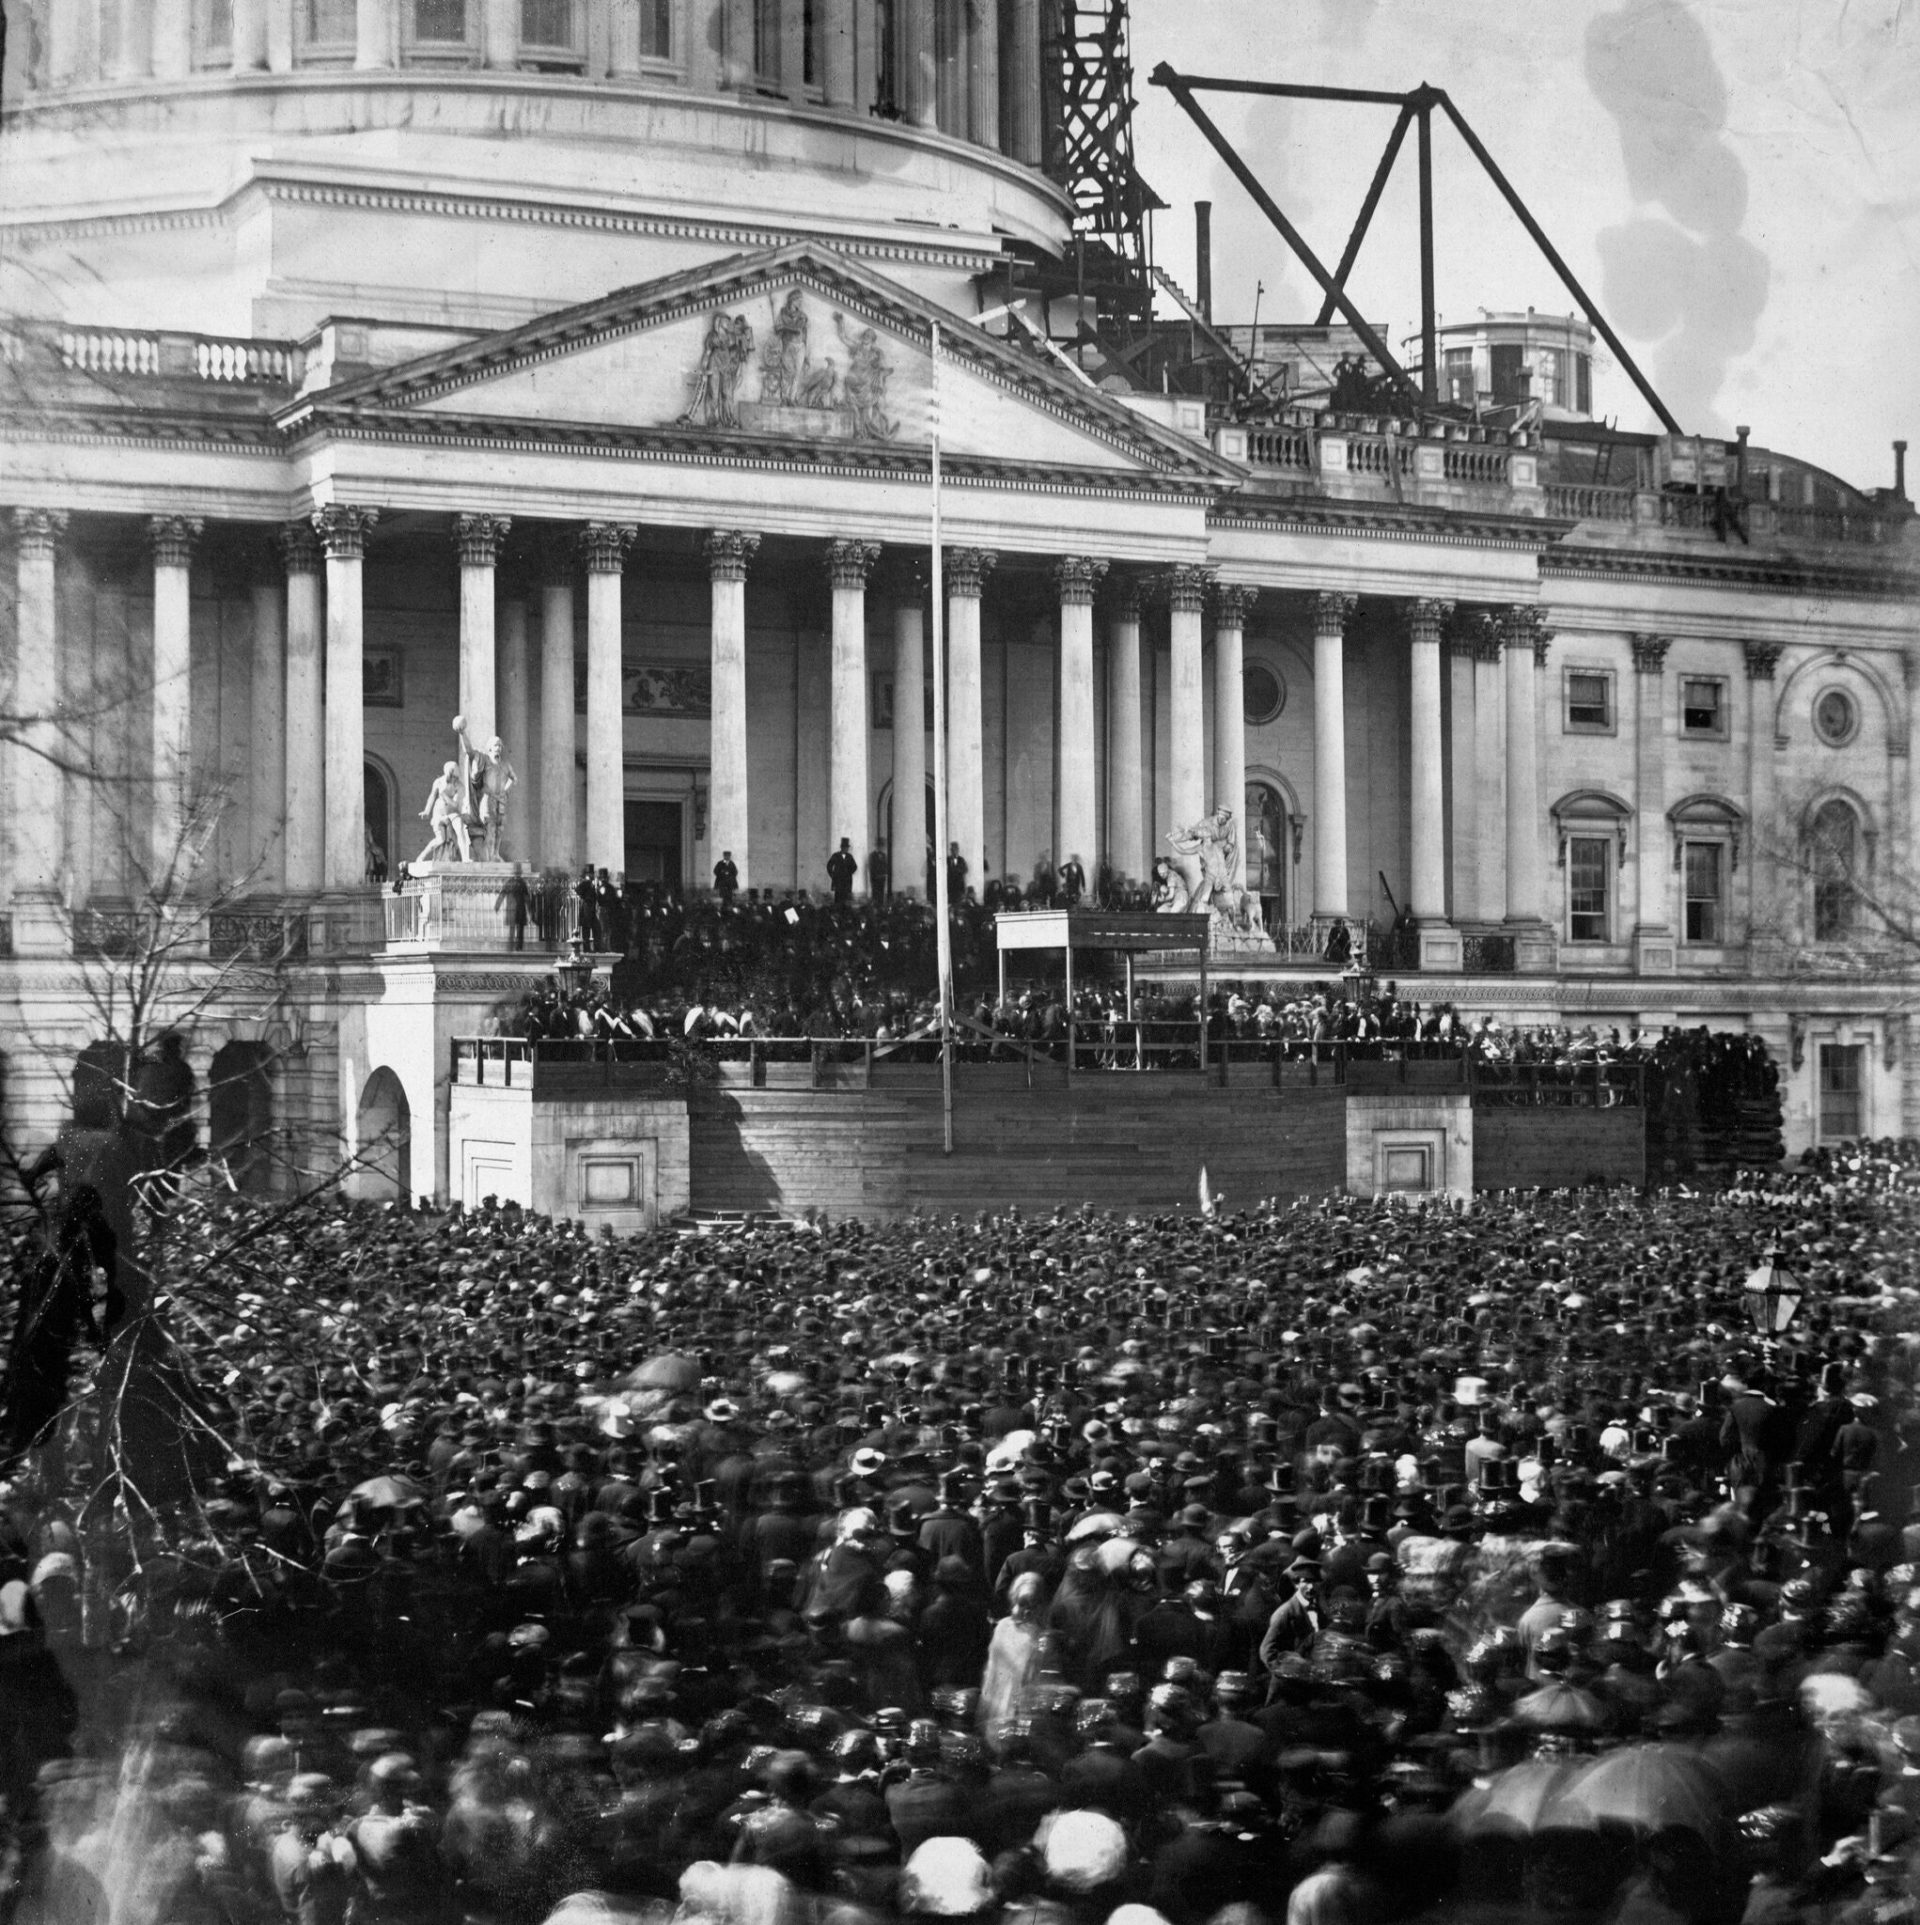 March 4, 1861 – The First Inauguration of Abraham Lincoln (Photo from the Library of Congress)